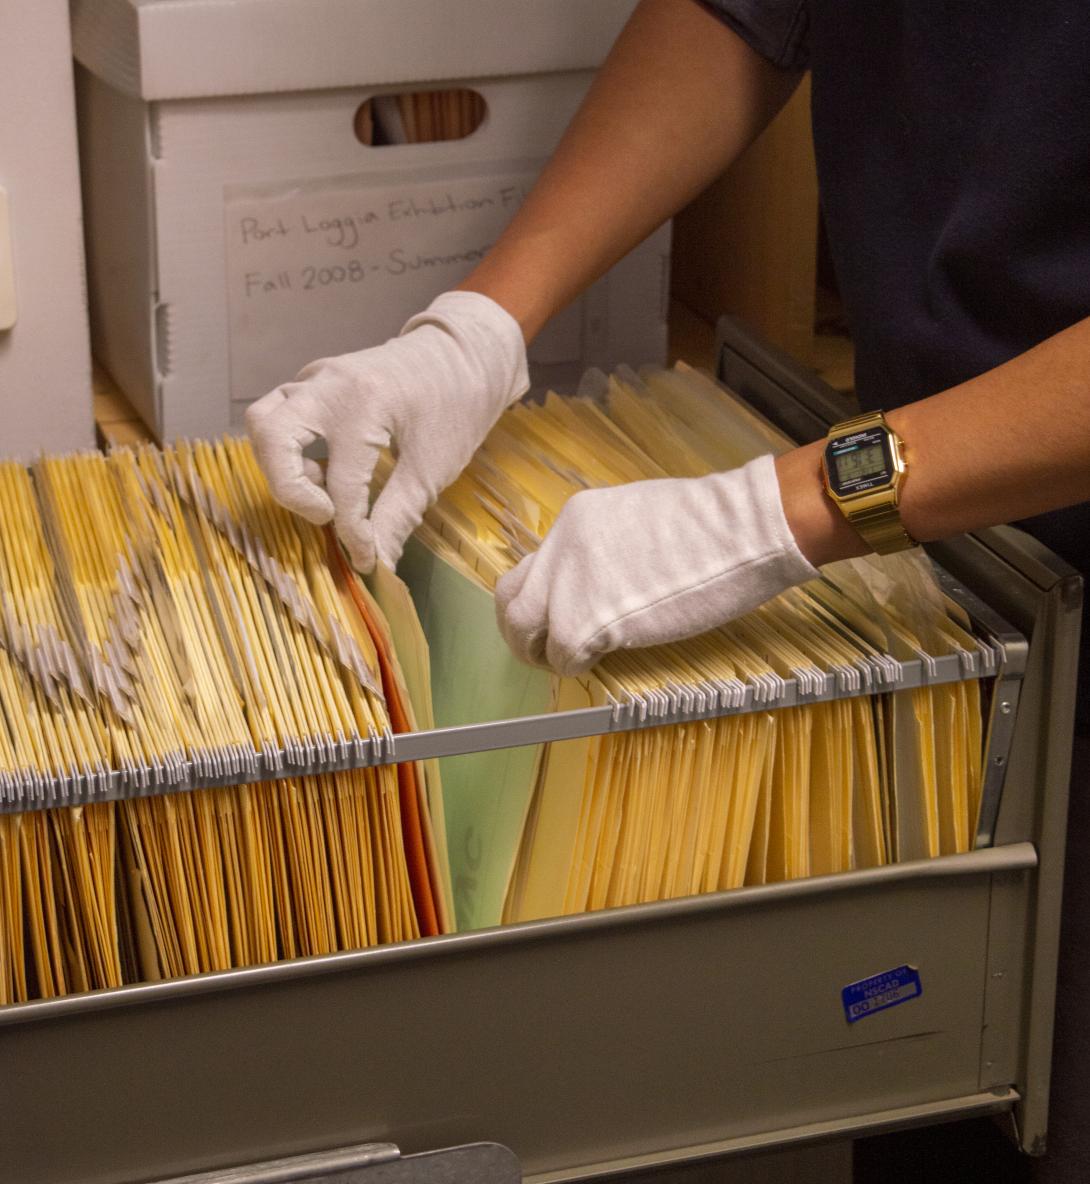 a dark skinned person wearing white gloves searches through a filing cabinet of yellow manilla folders